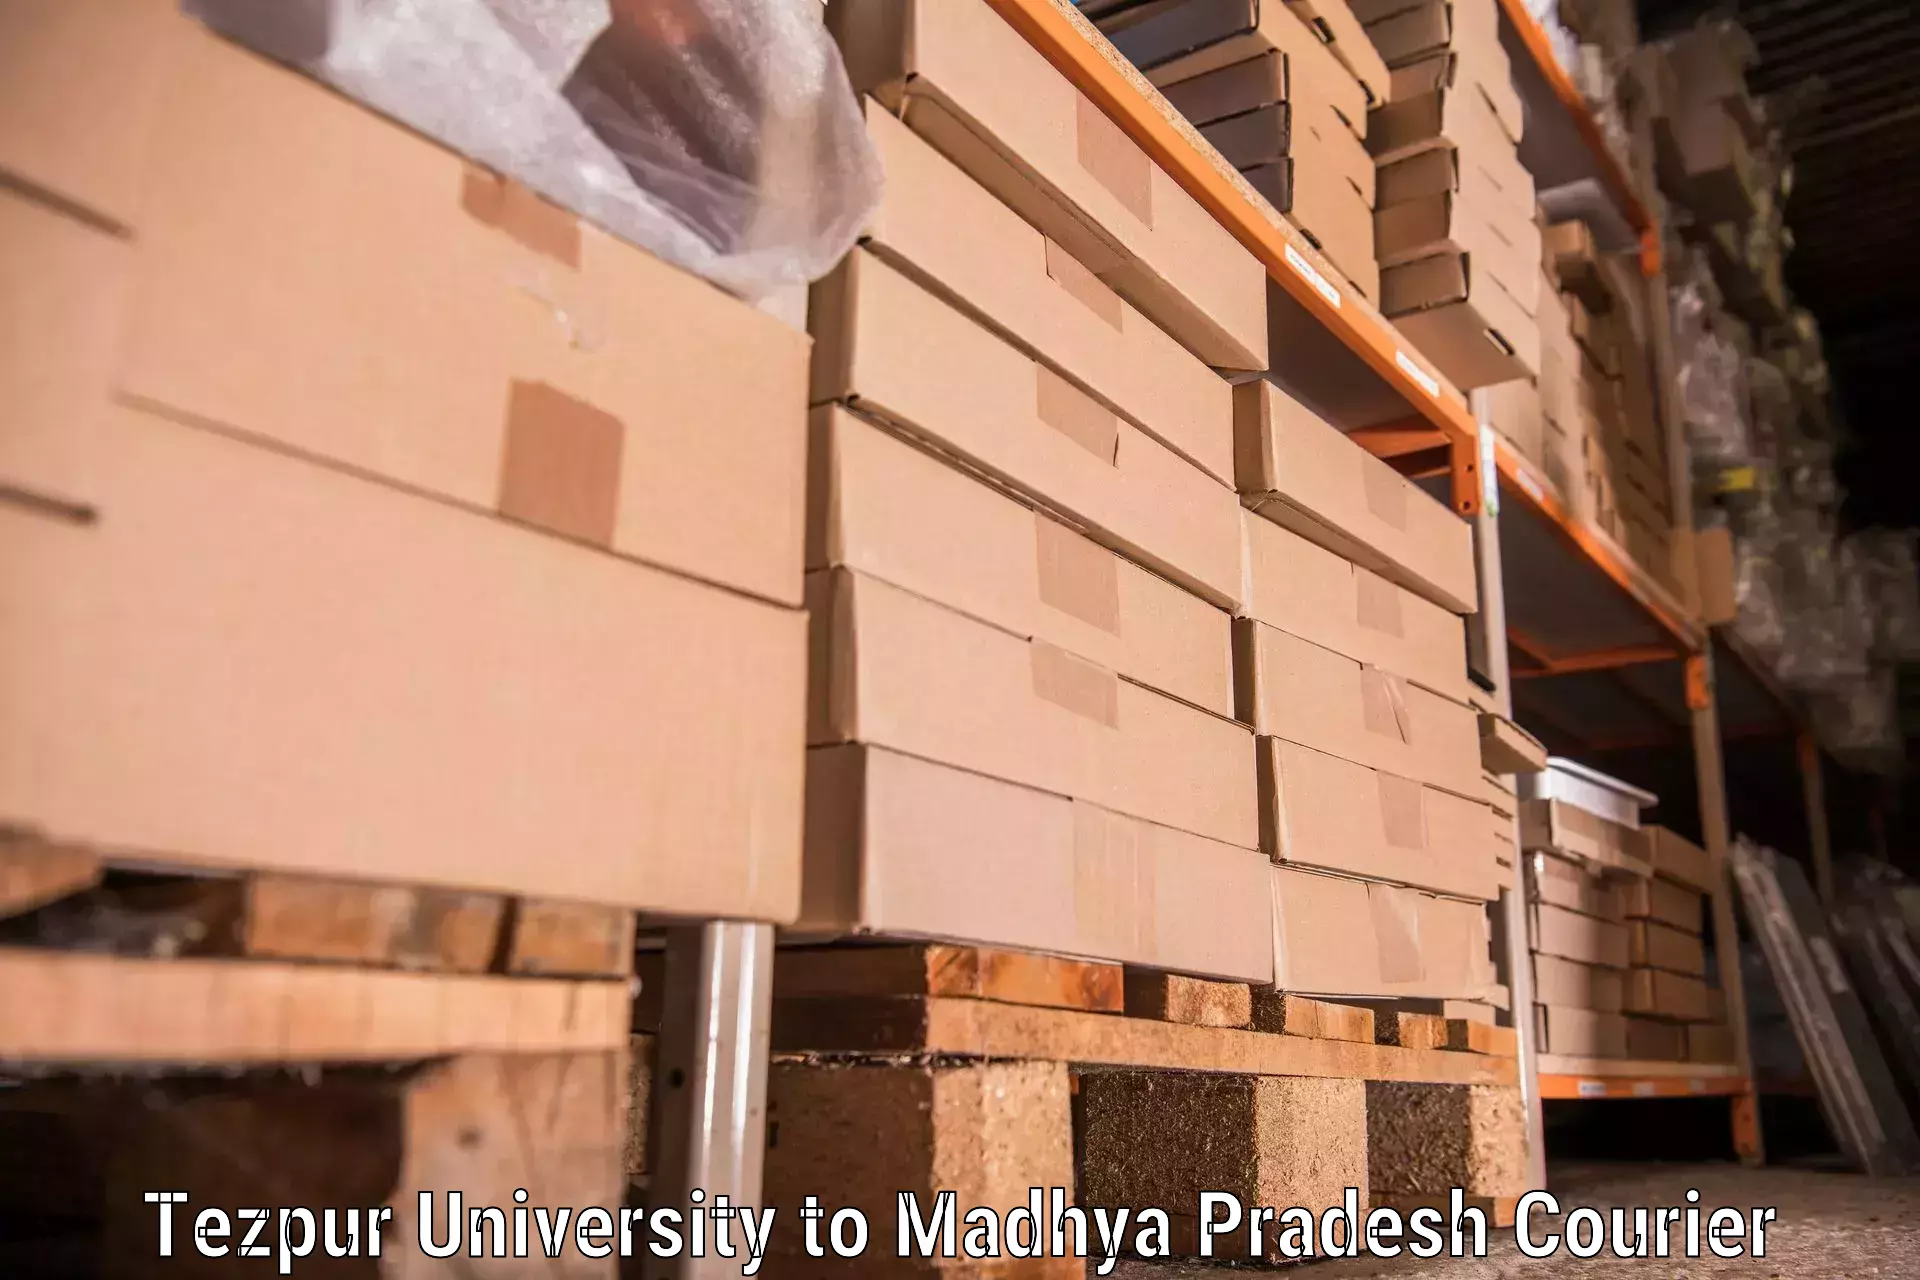 Home furniture relocation Tezpur University to Deosar